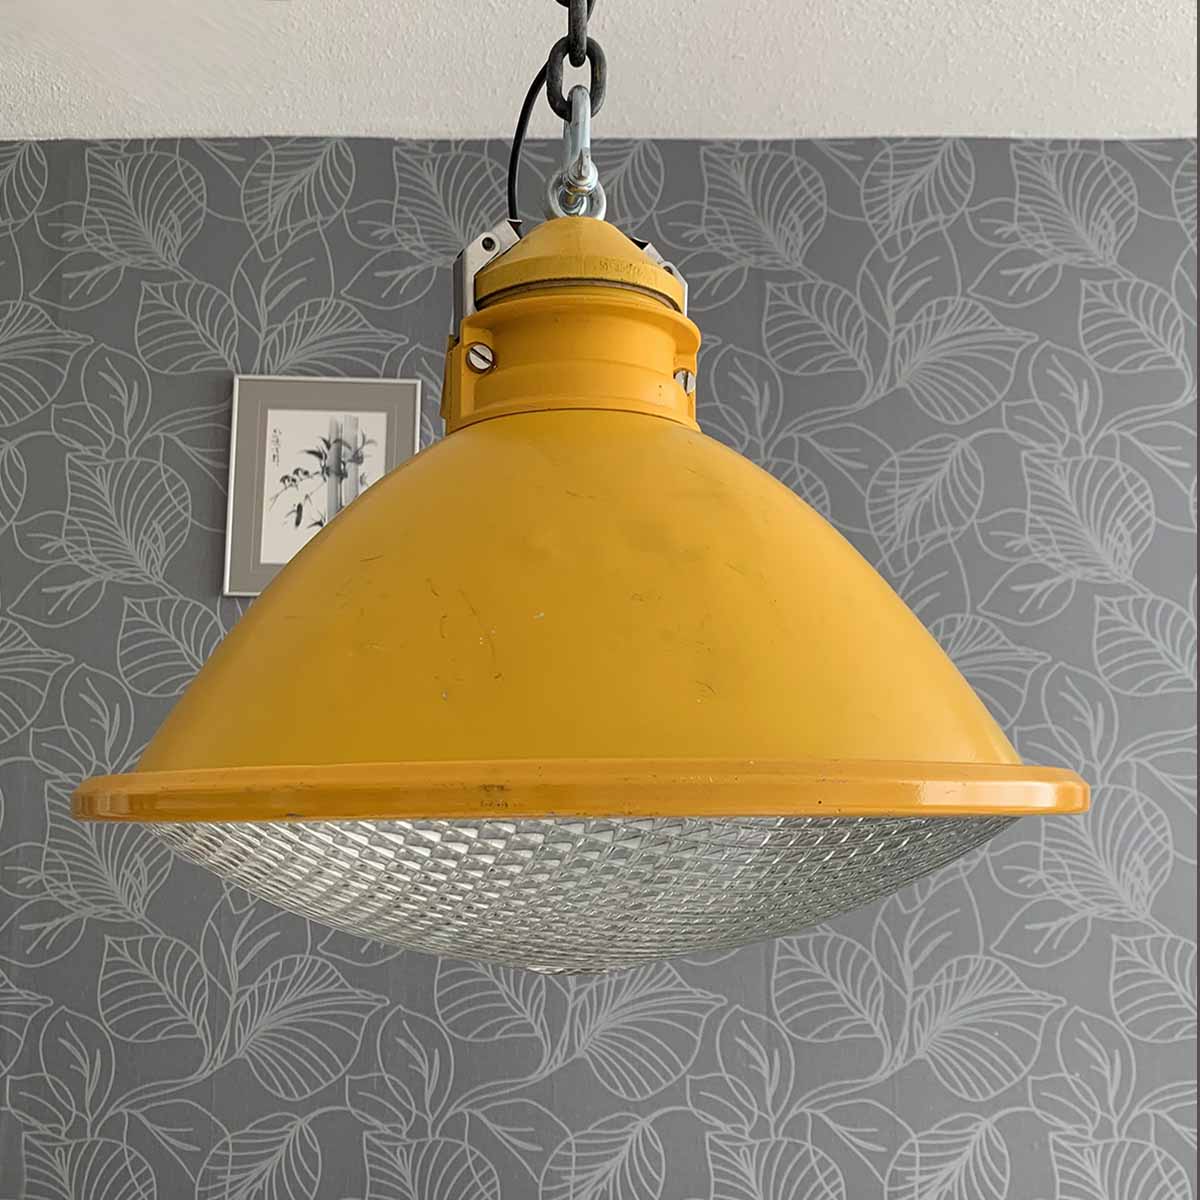 Large yellow runway light in use as a ceiling light.